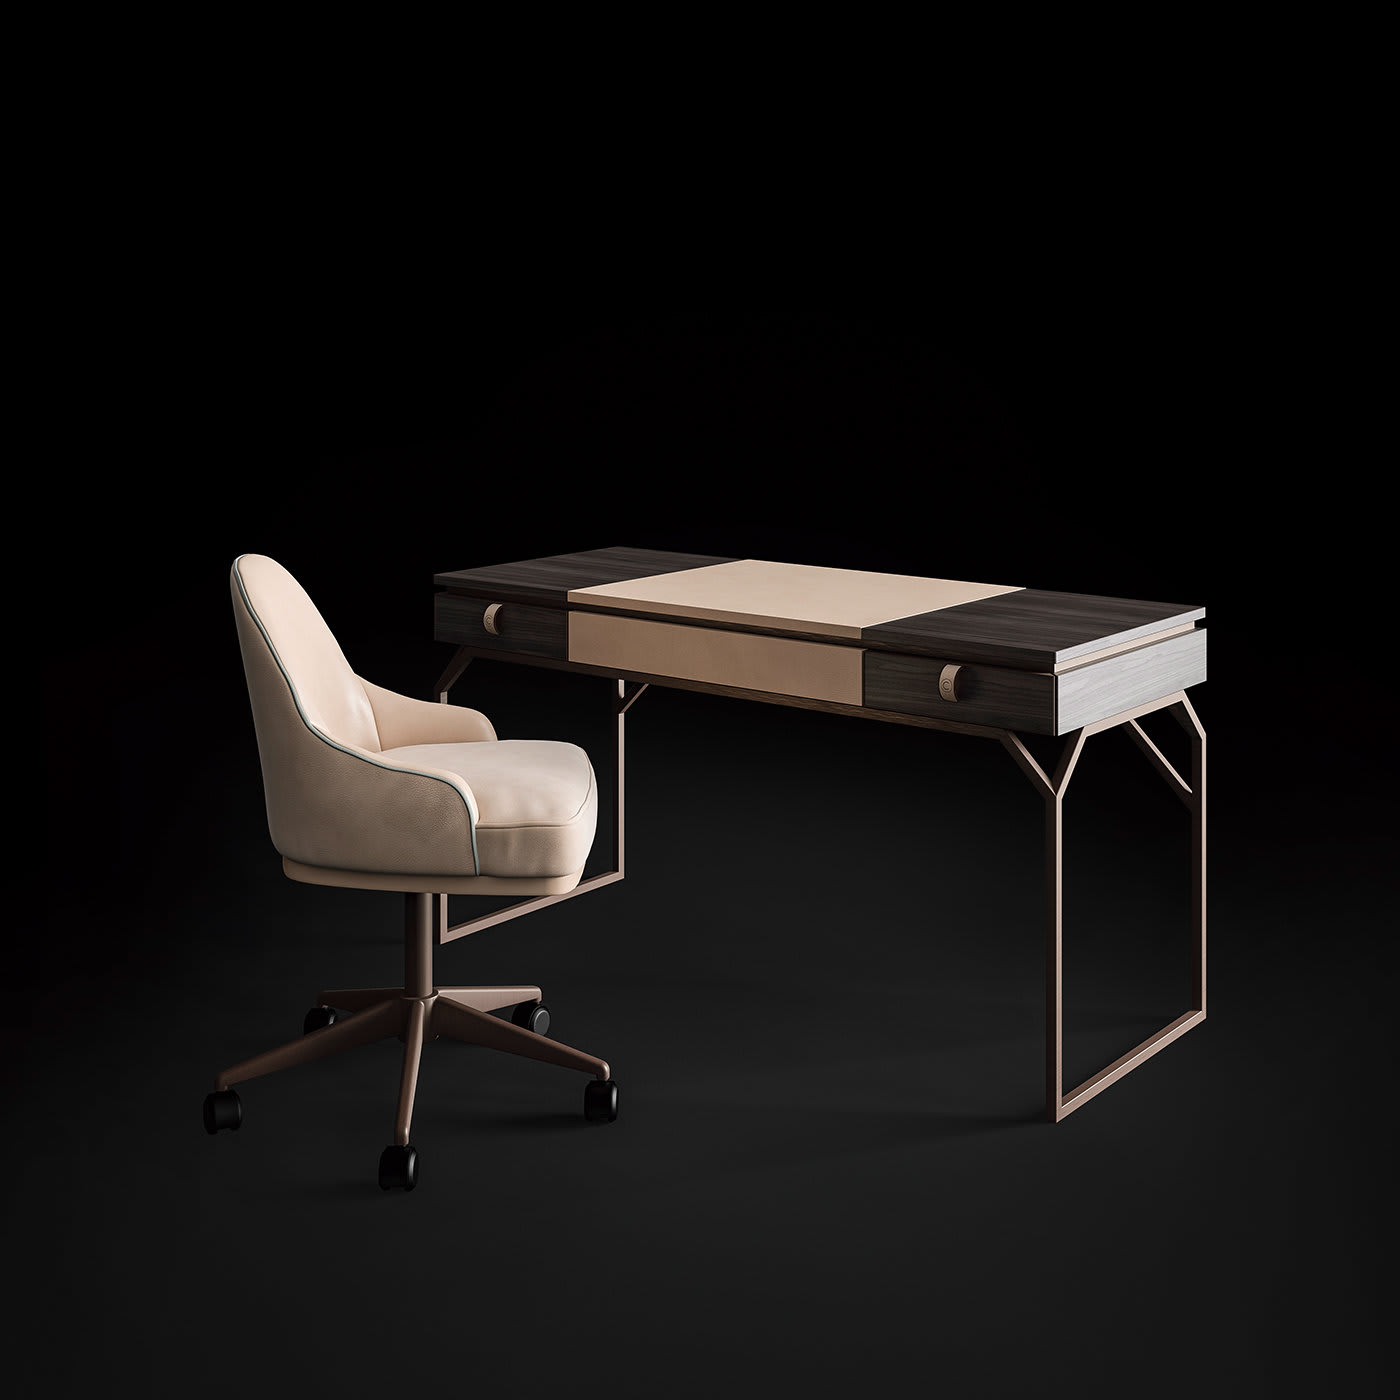 Desk in leather and wood - CPRN Homood